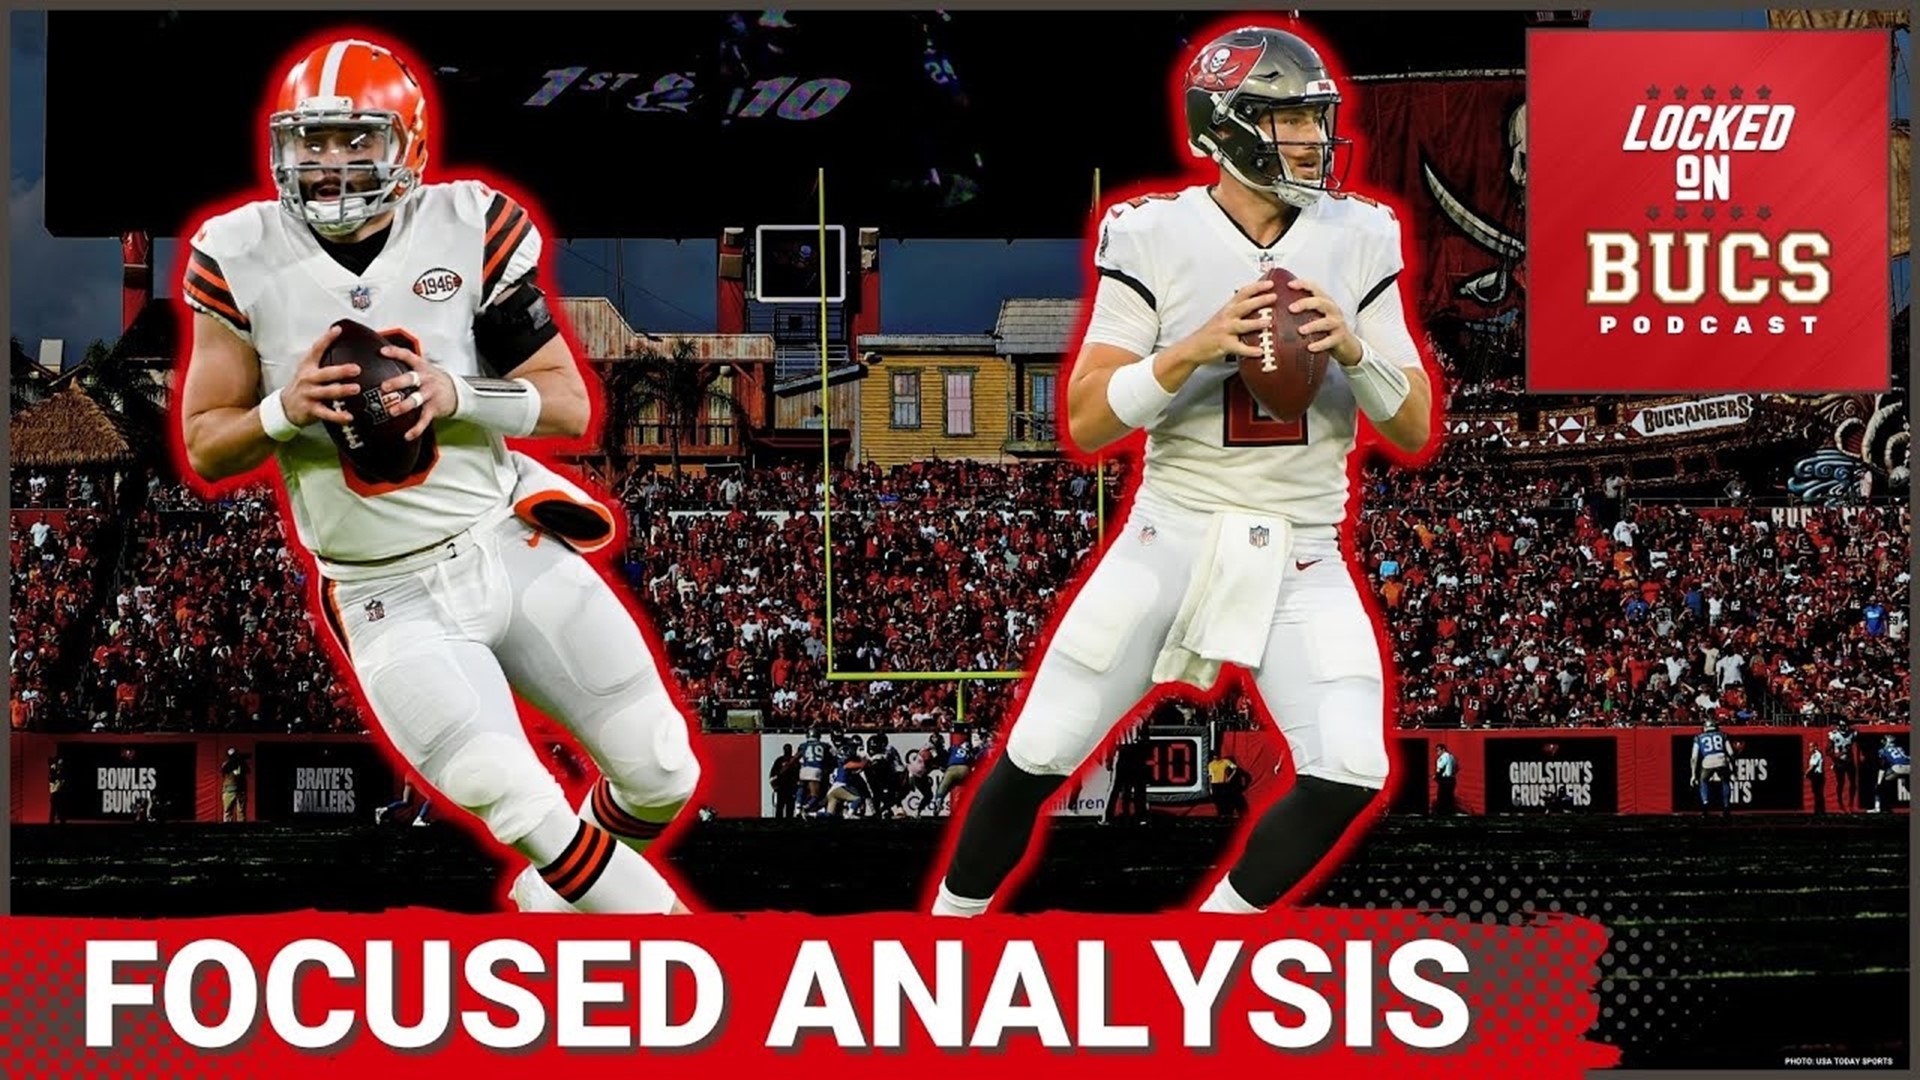 James Yarcho and David Harrison bring the most comprehensive analysis and commentary on the Tampa Bay Buccaneers with the Locked On Bucs podcast.